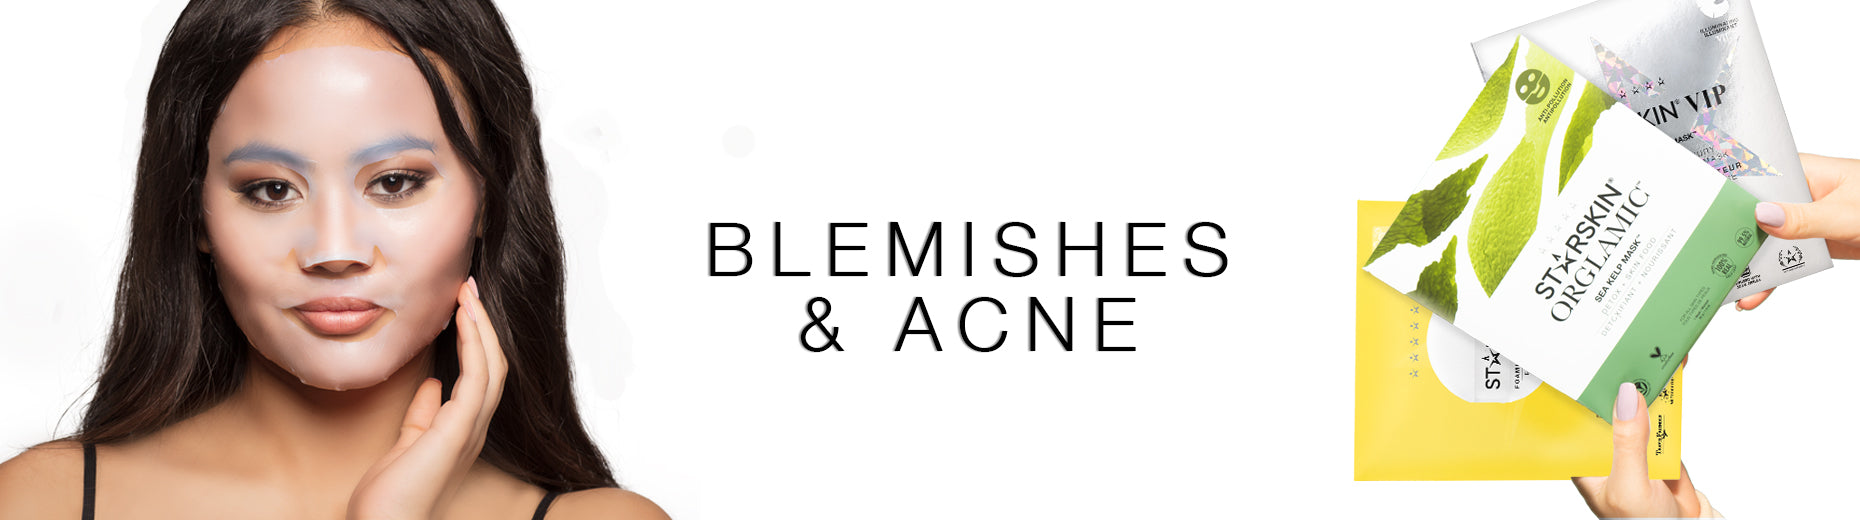 banner acne model and bio cellose sheet mask